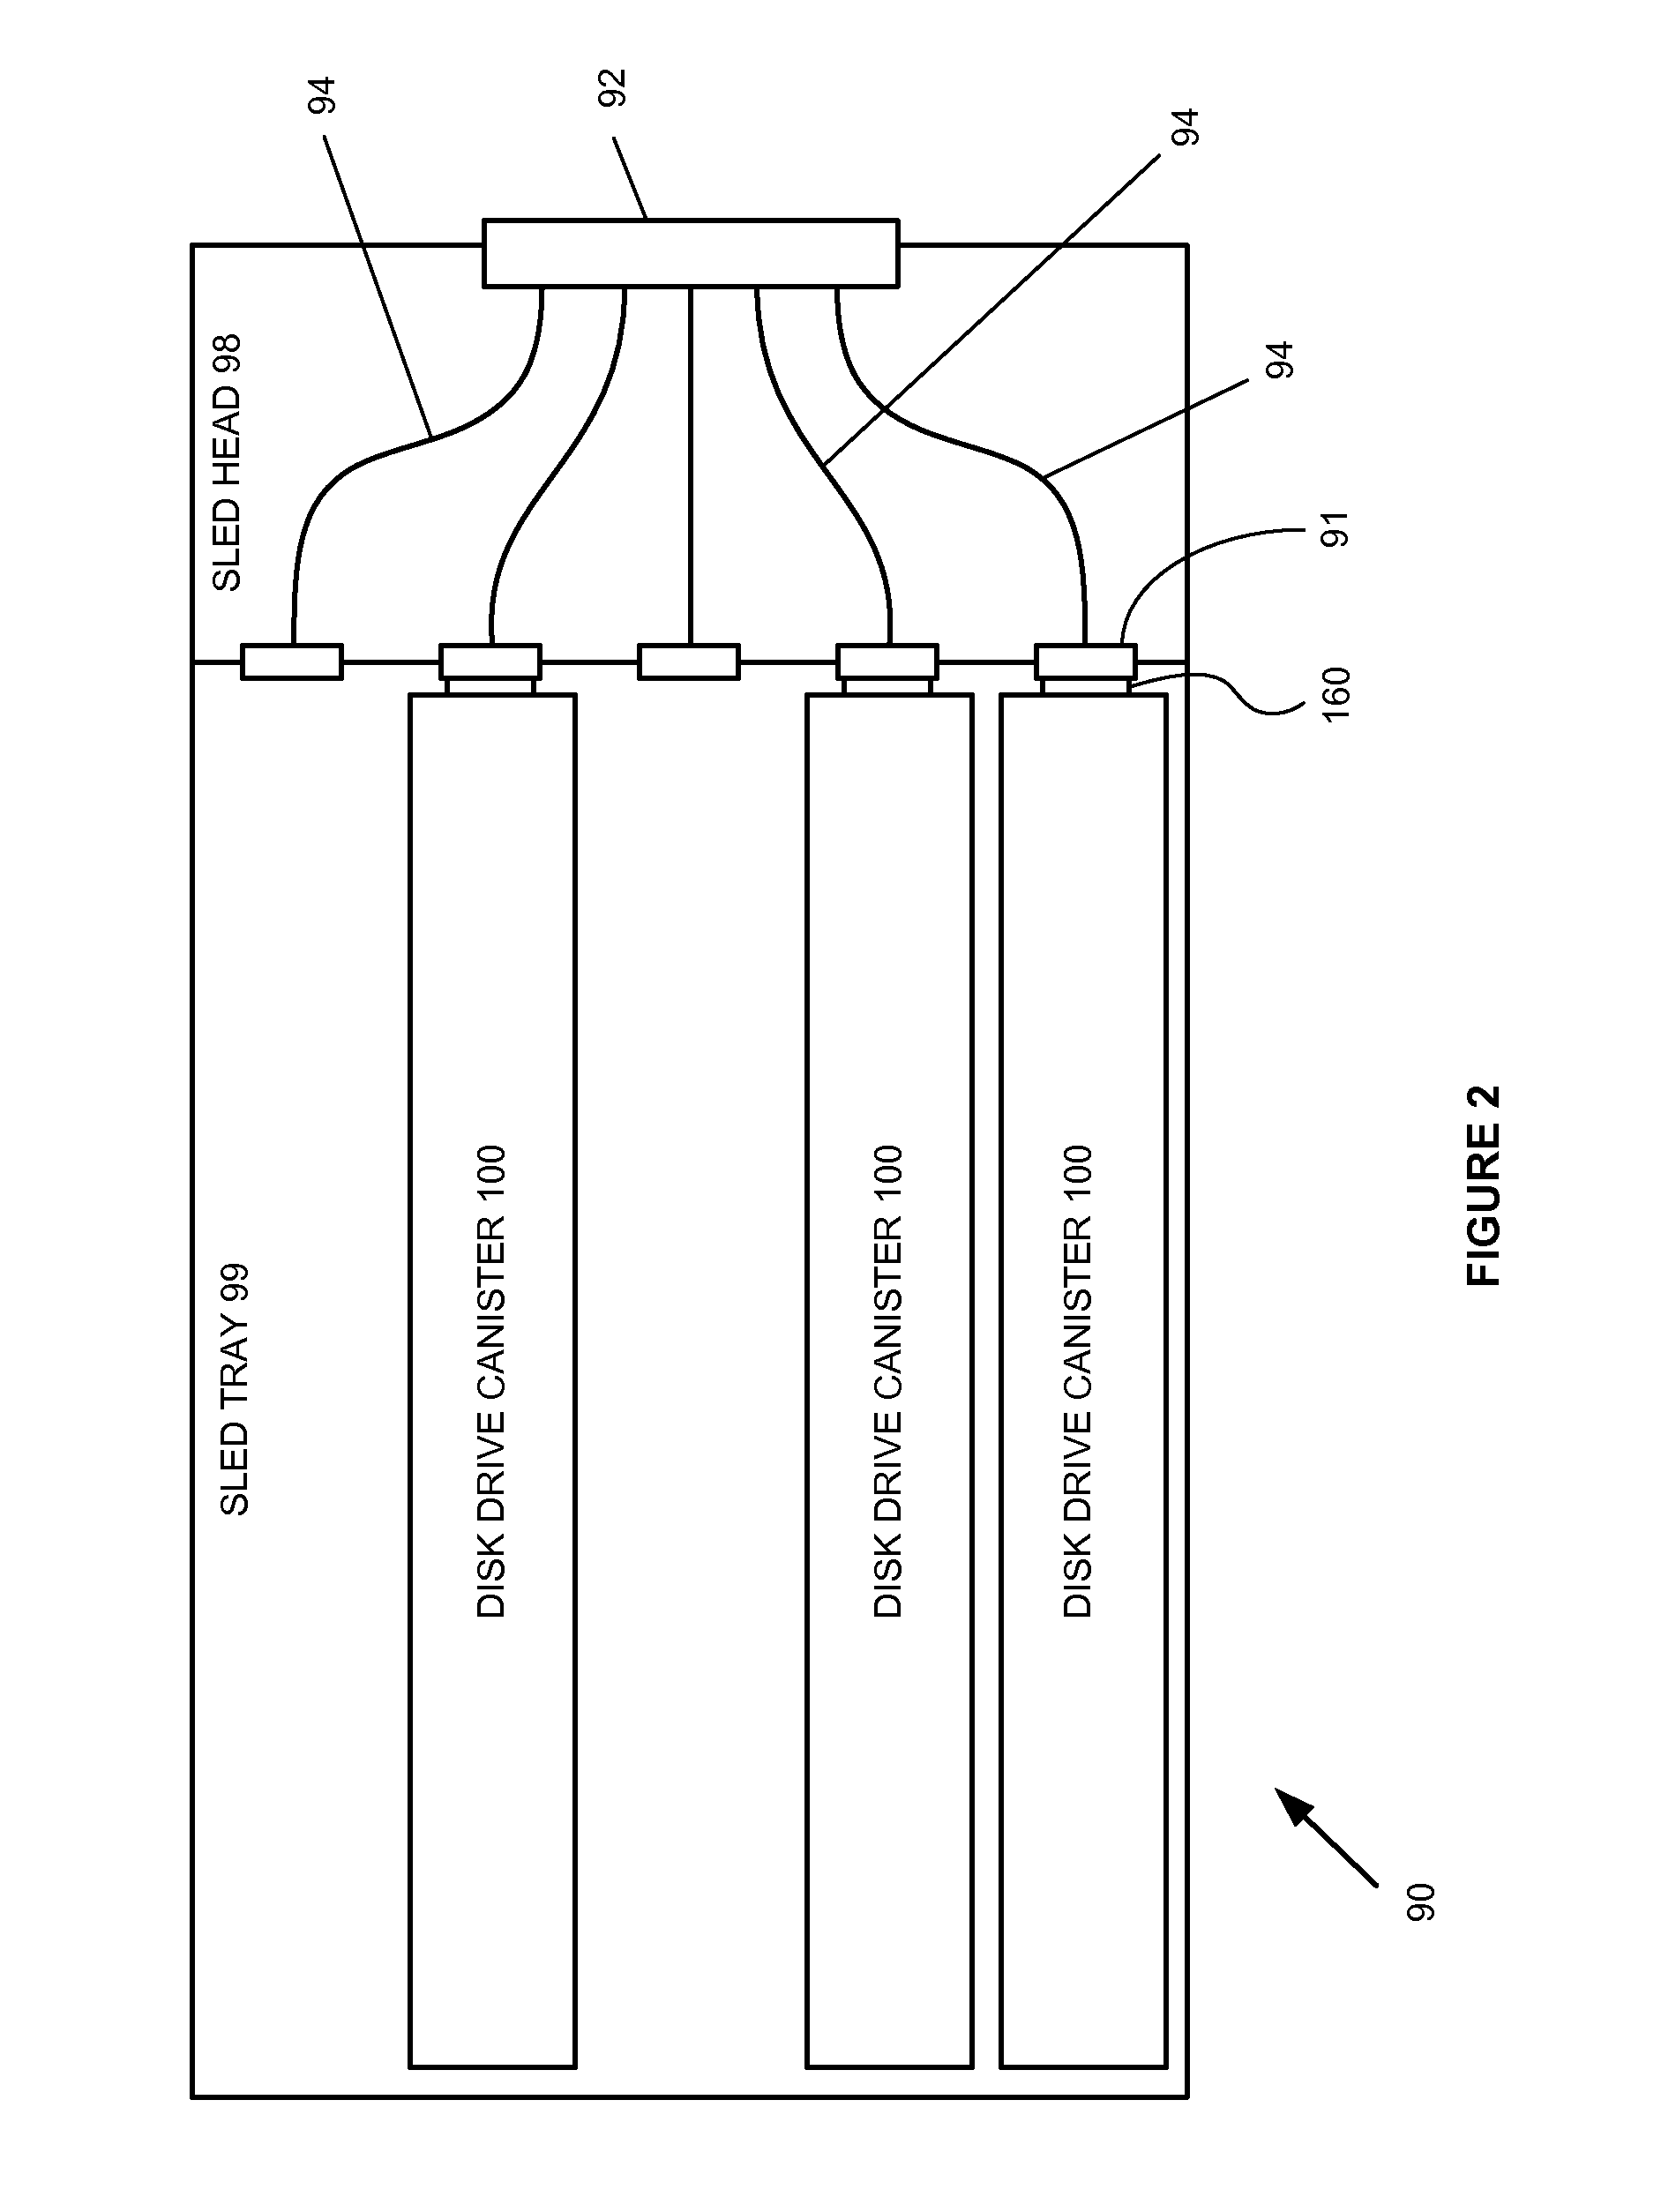 Storage canister with multiple storage device mounting elements